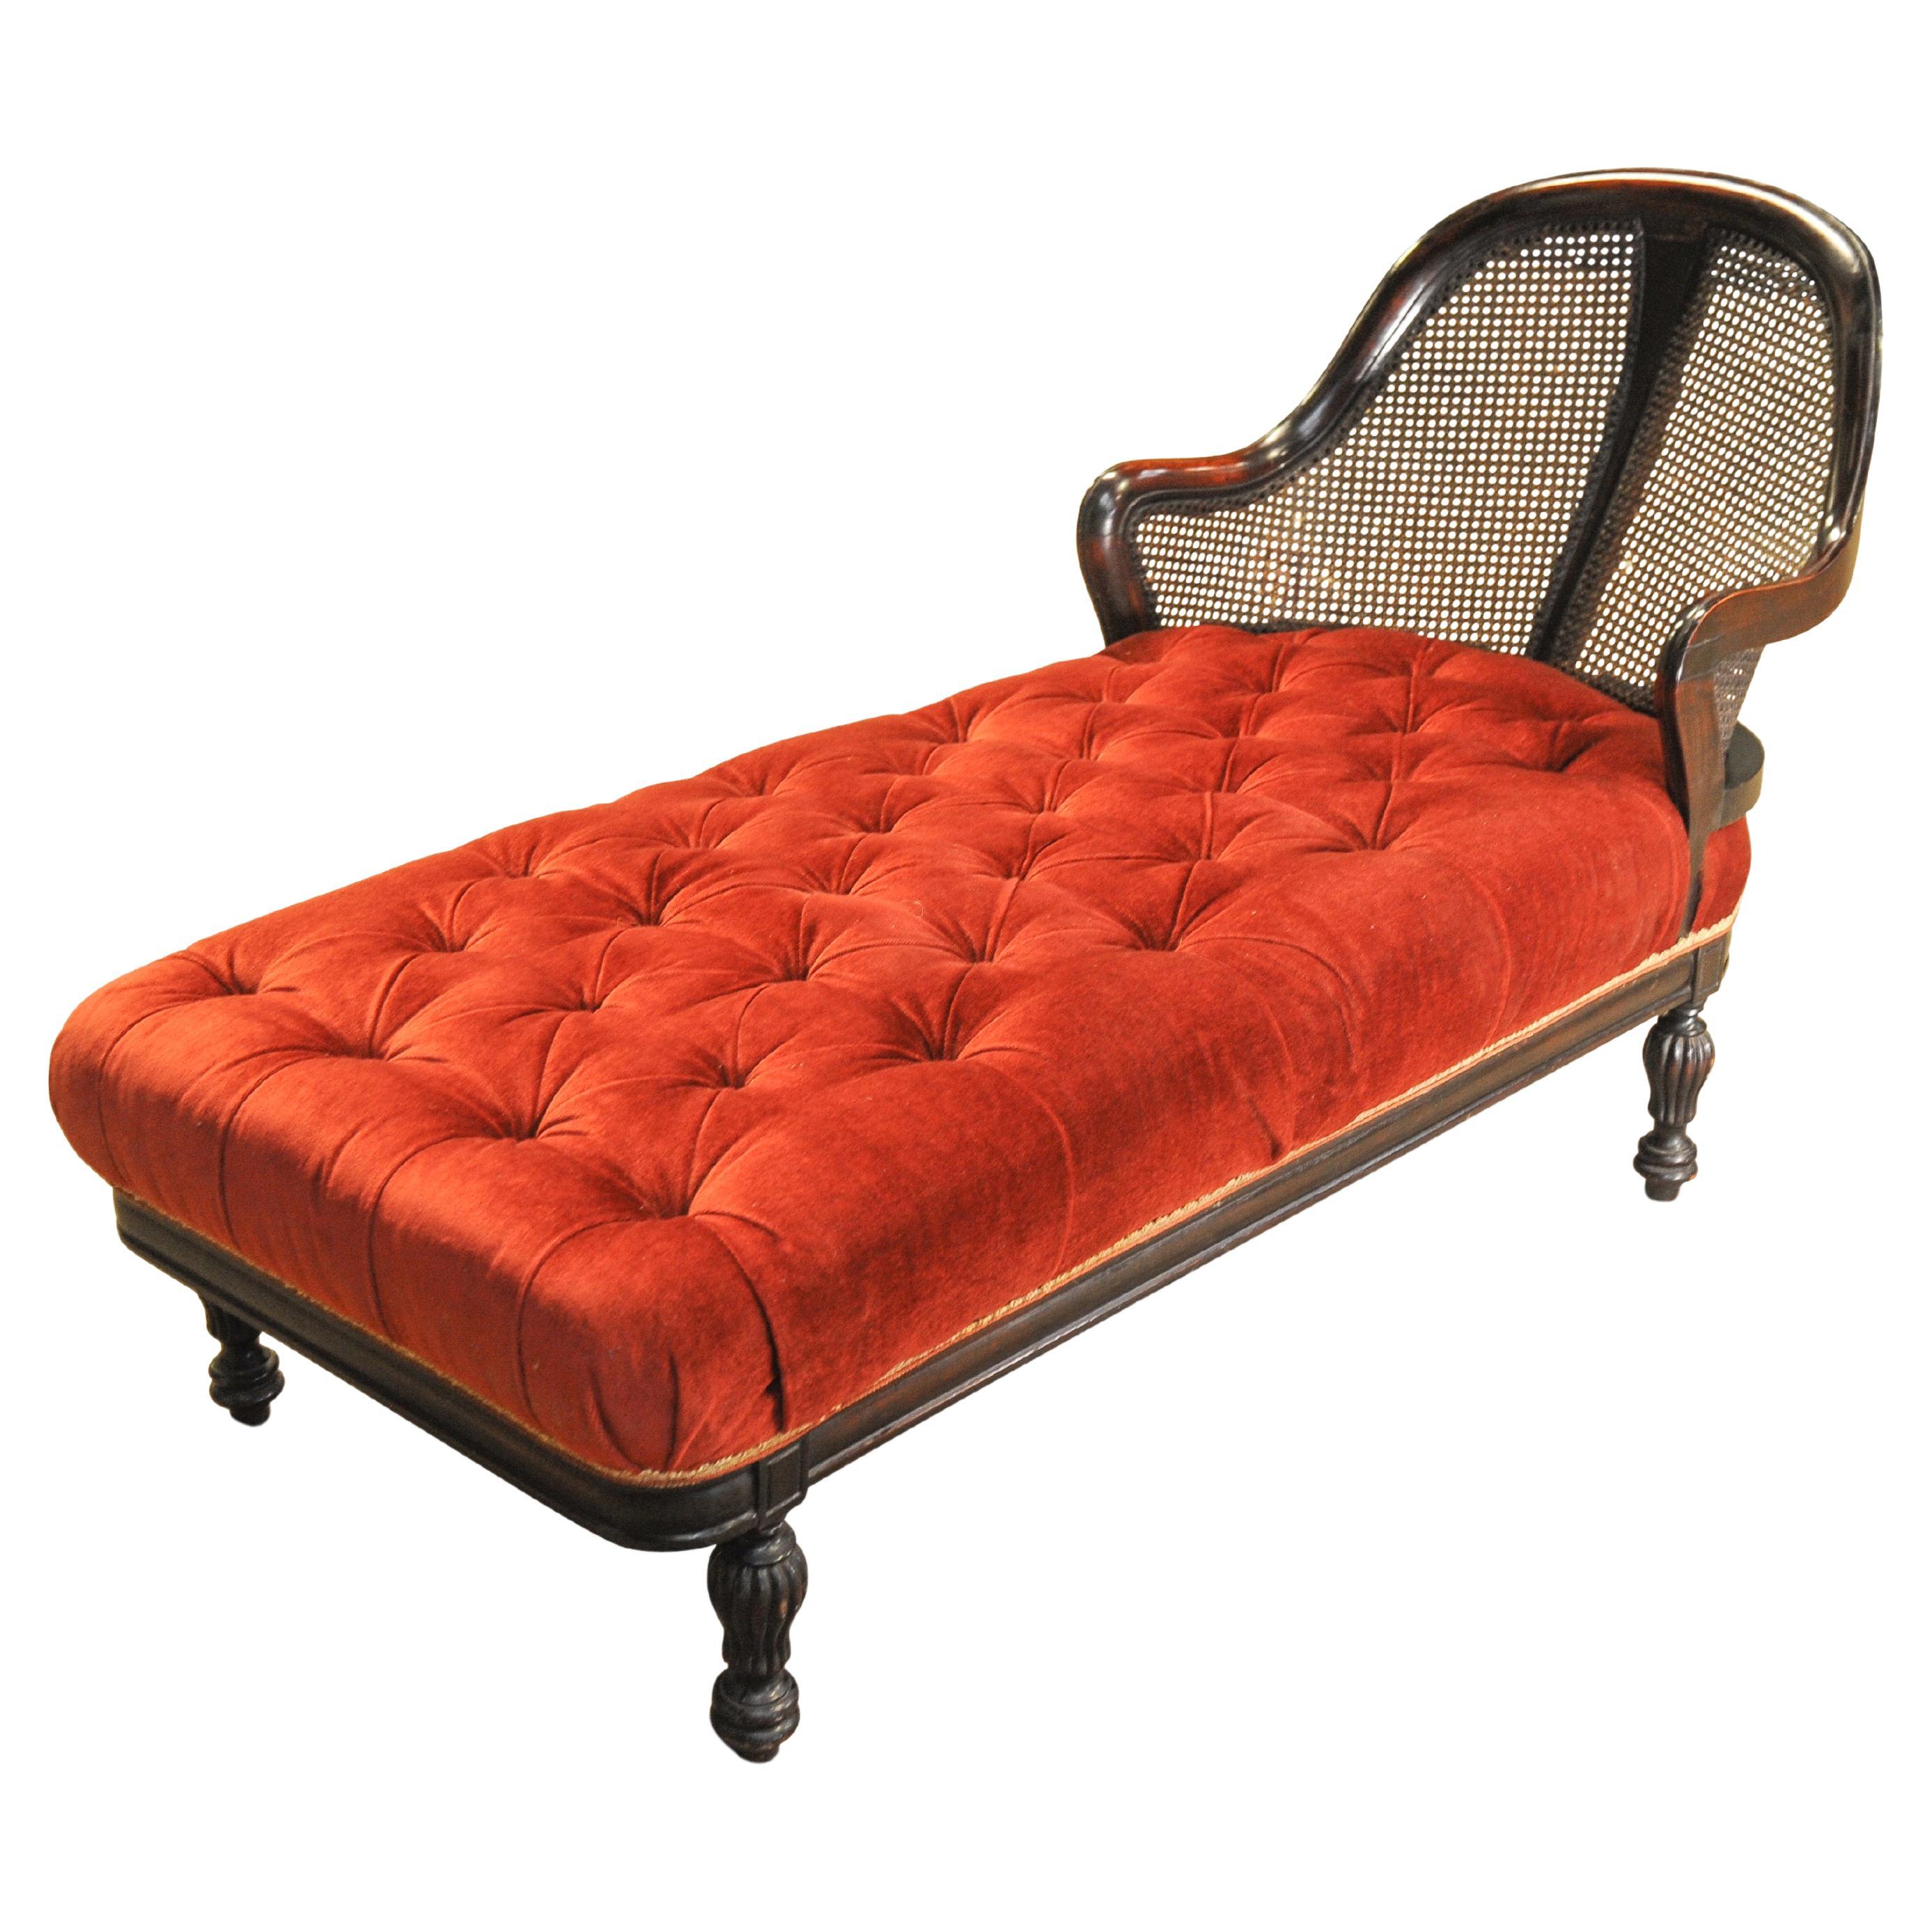 Rare Victorian Red Velvet Chesterfield Bergere Chaise Longue / Day Bed  For Sale